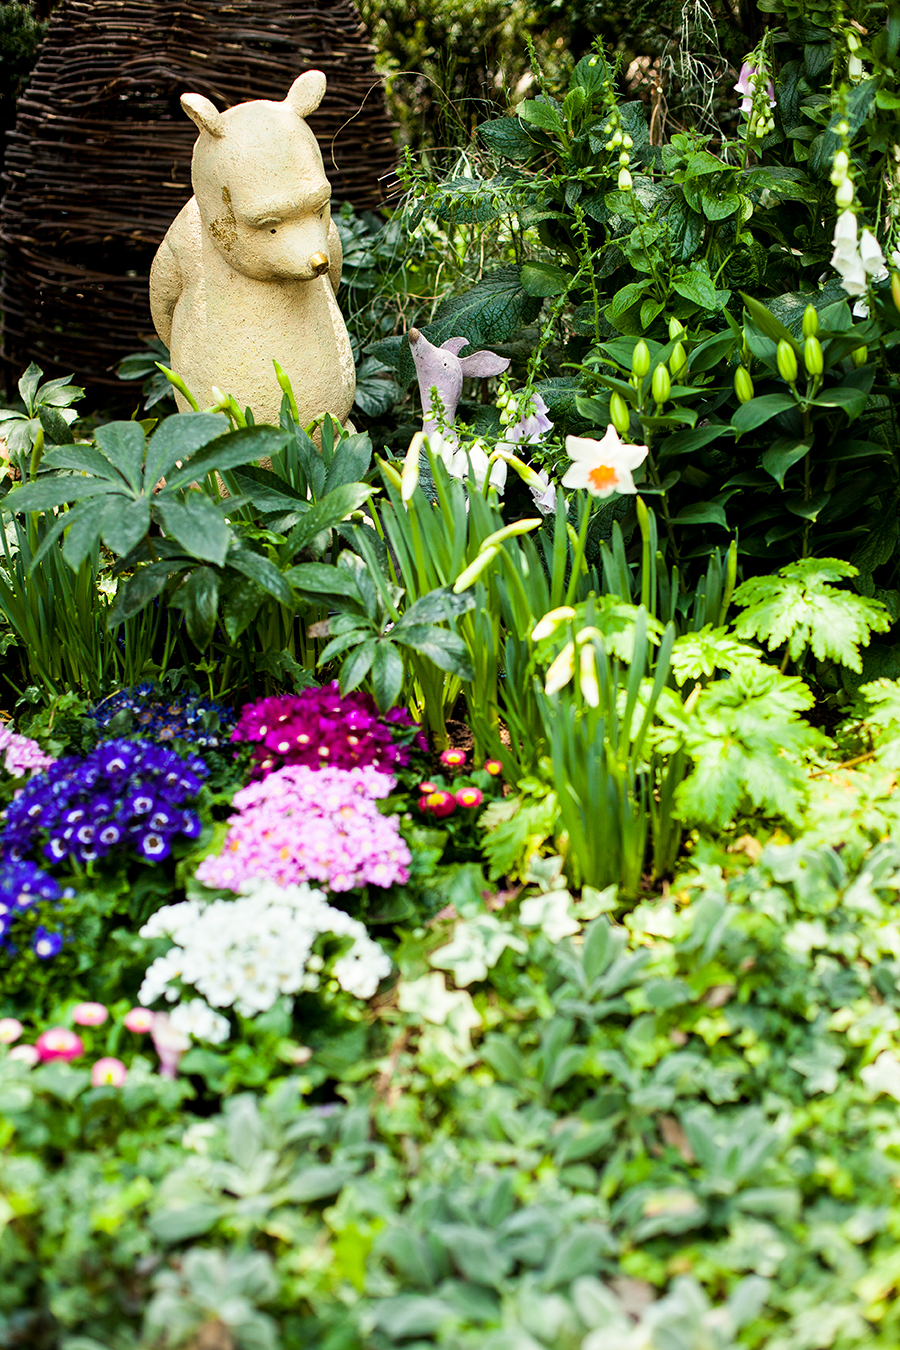 Winnie the Pooh and Piglet among flowers at the Flower Dome at Gardens by the Bay, Singapore.